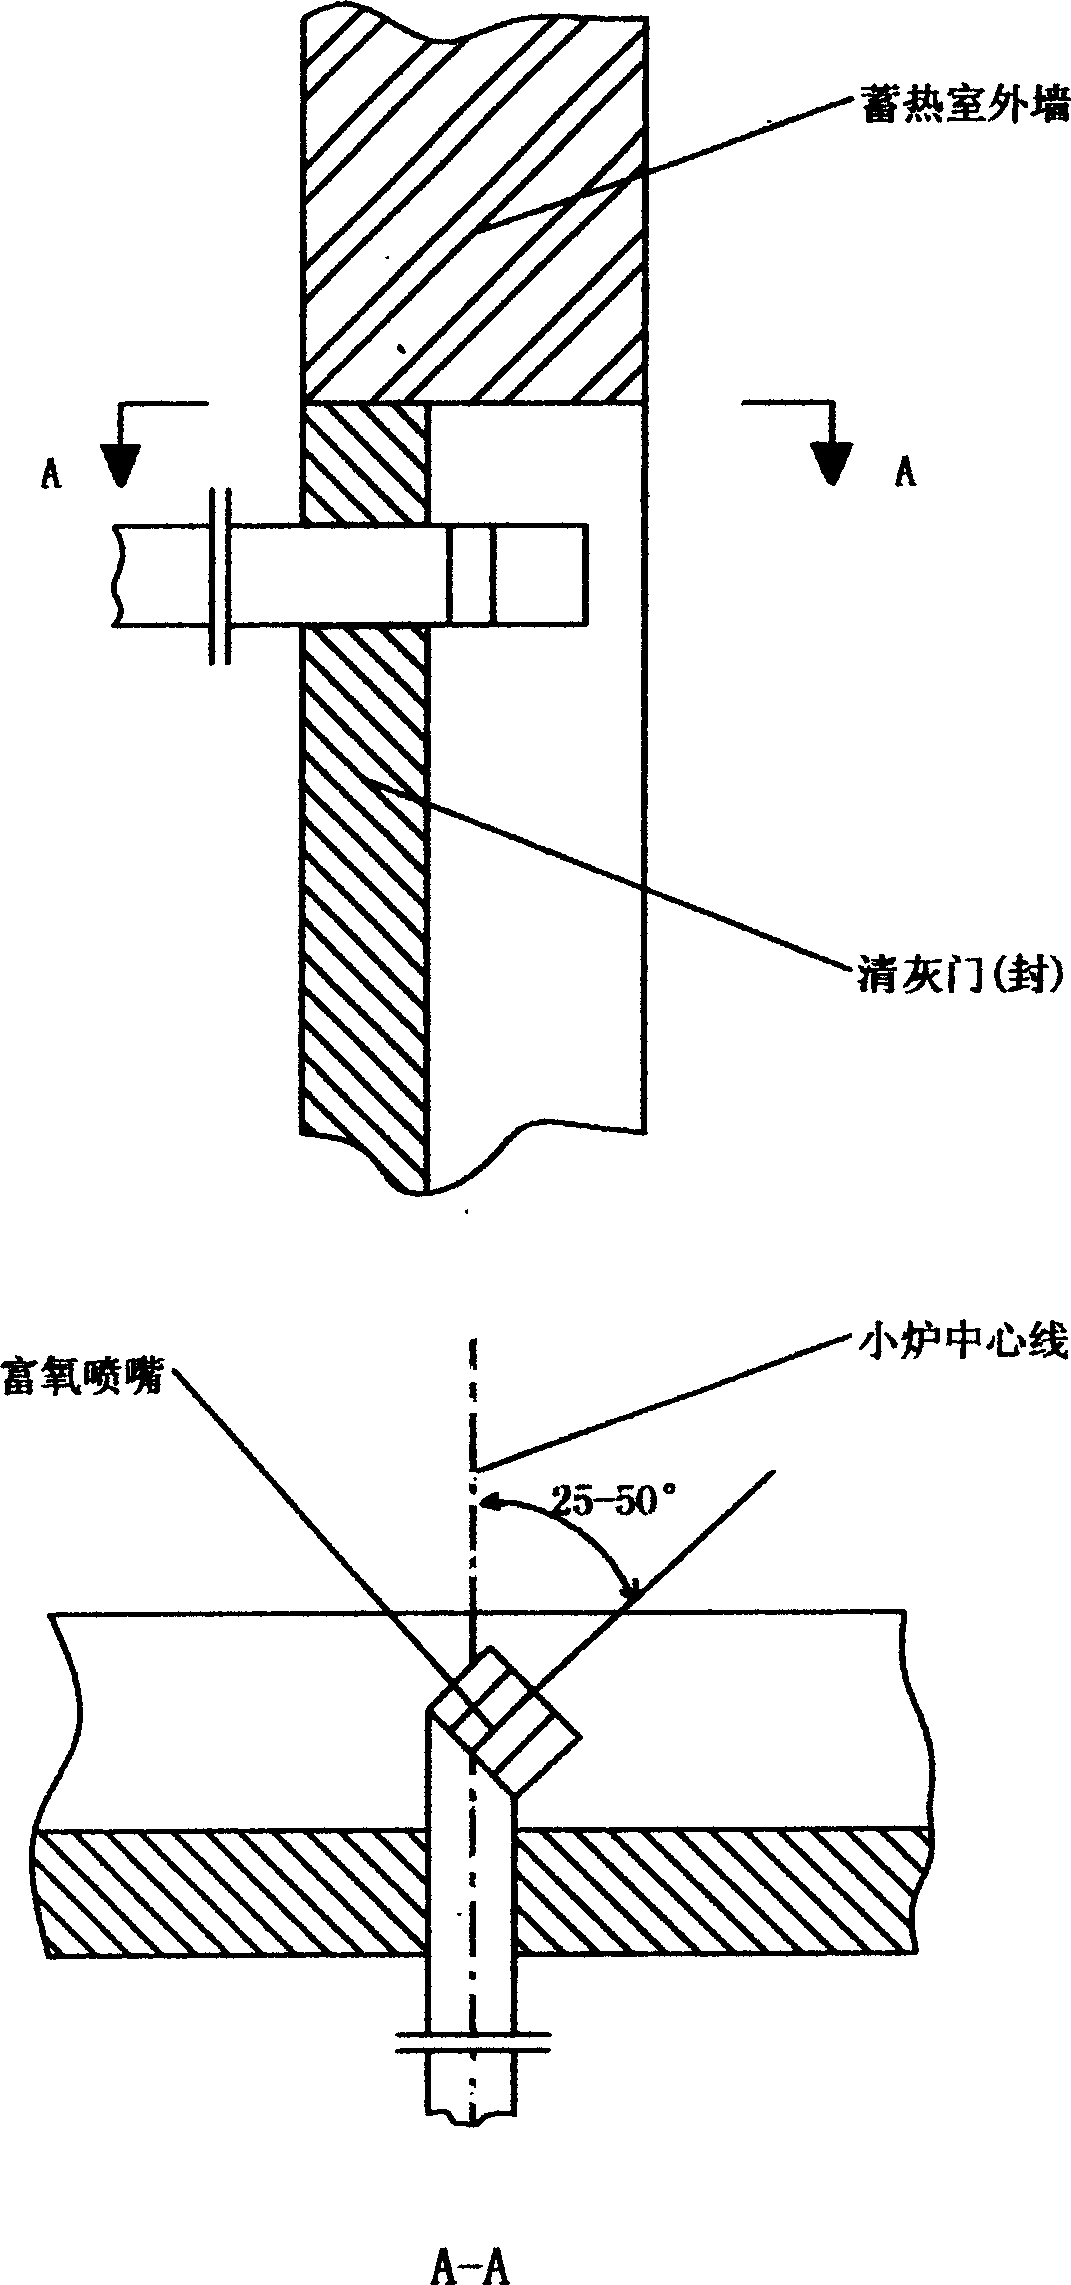 Oxygen enrichment combustion-supporting method for float glass melter